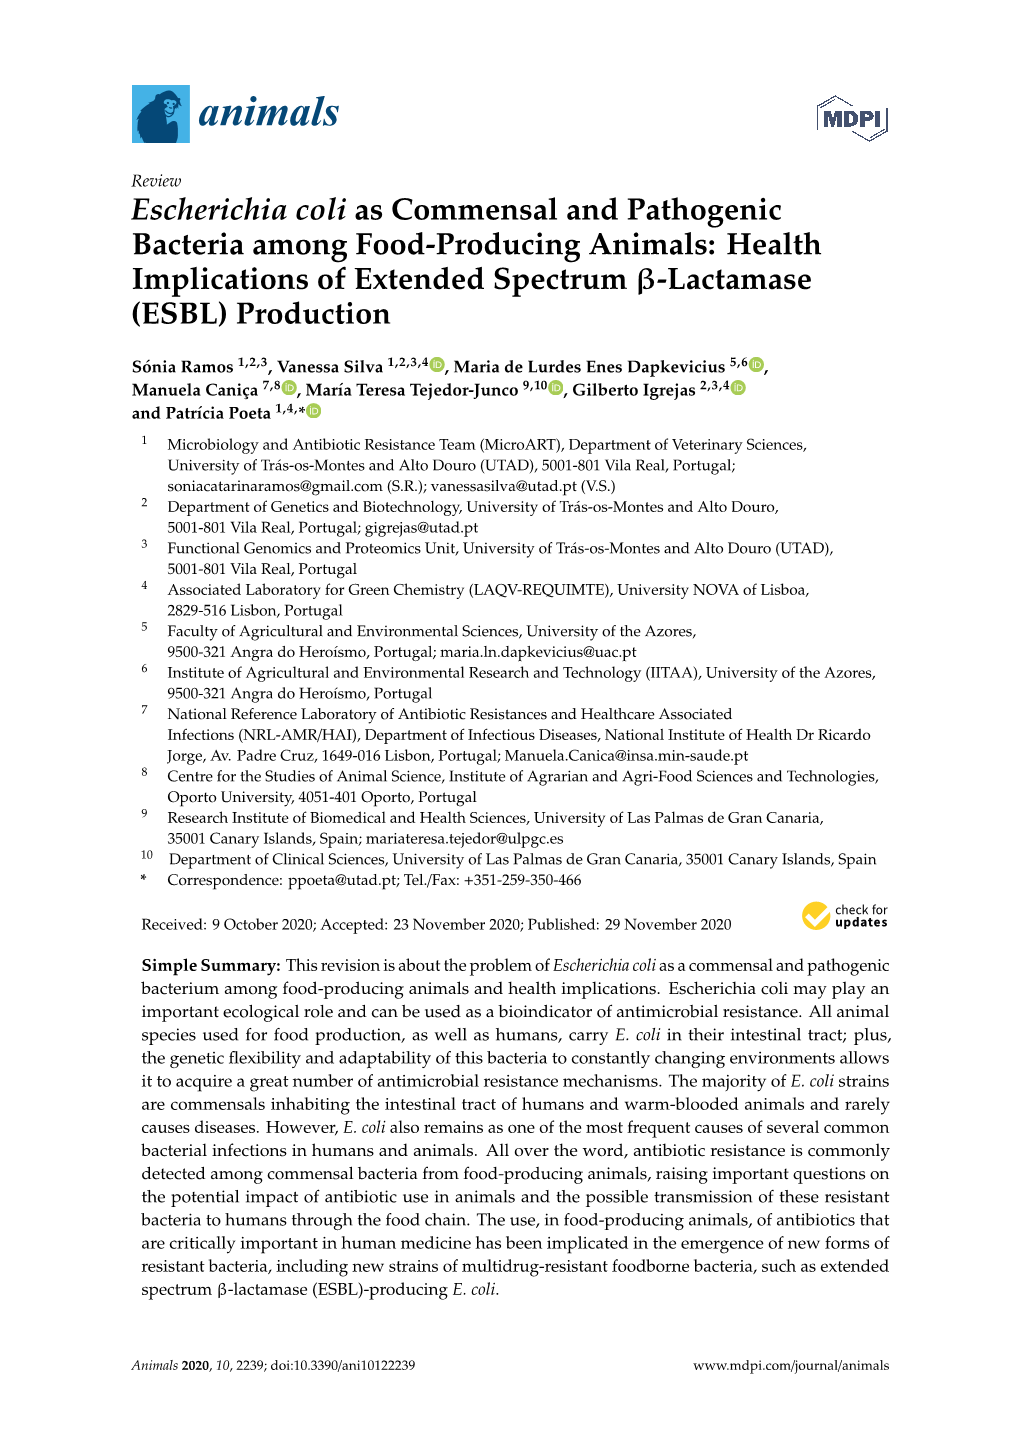 Escherichia Coli As Commensal and Pathogenic Bacteria Among Food-Producing Animals: Health Implications of Extended Spectrum Β-Lactamase (ESBL) Production